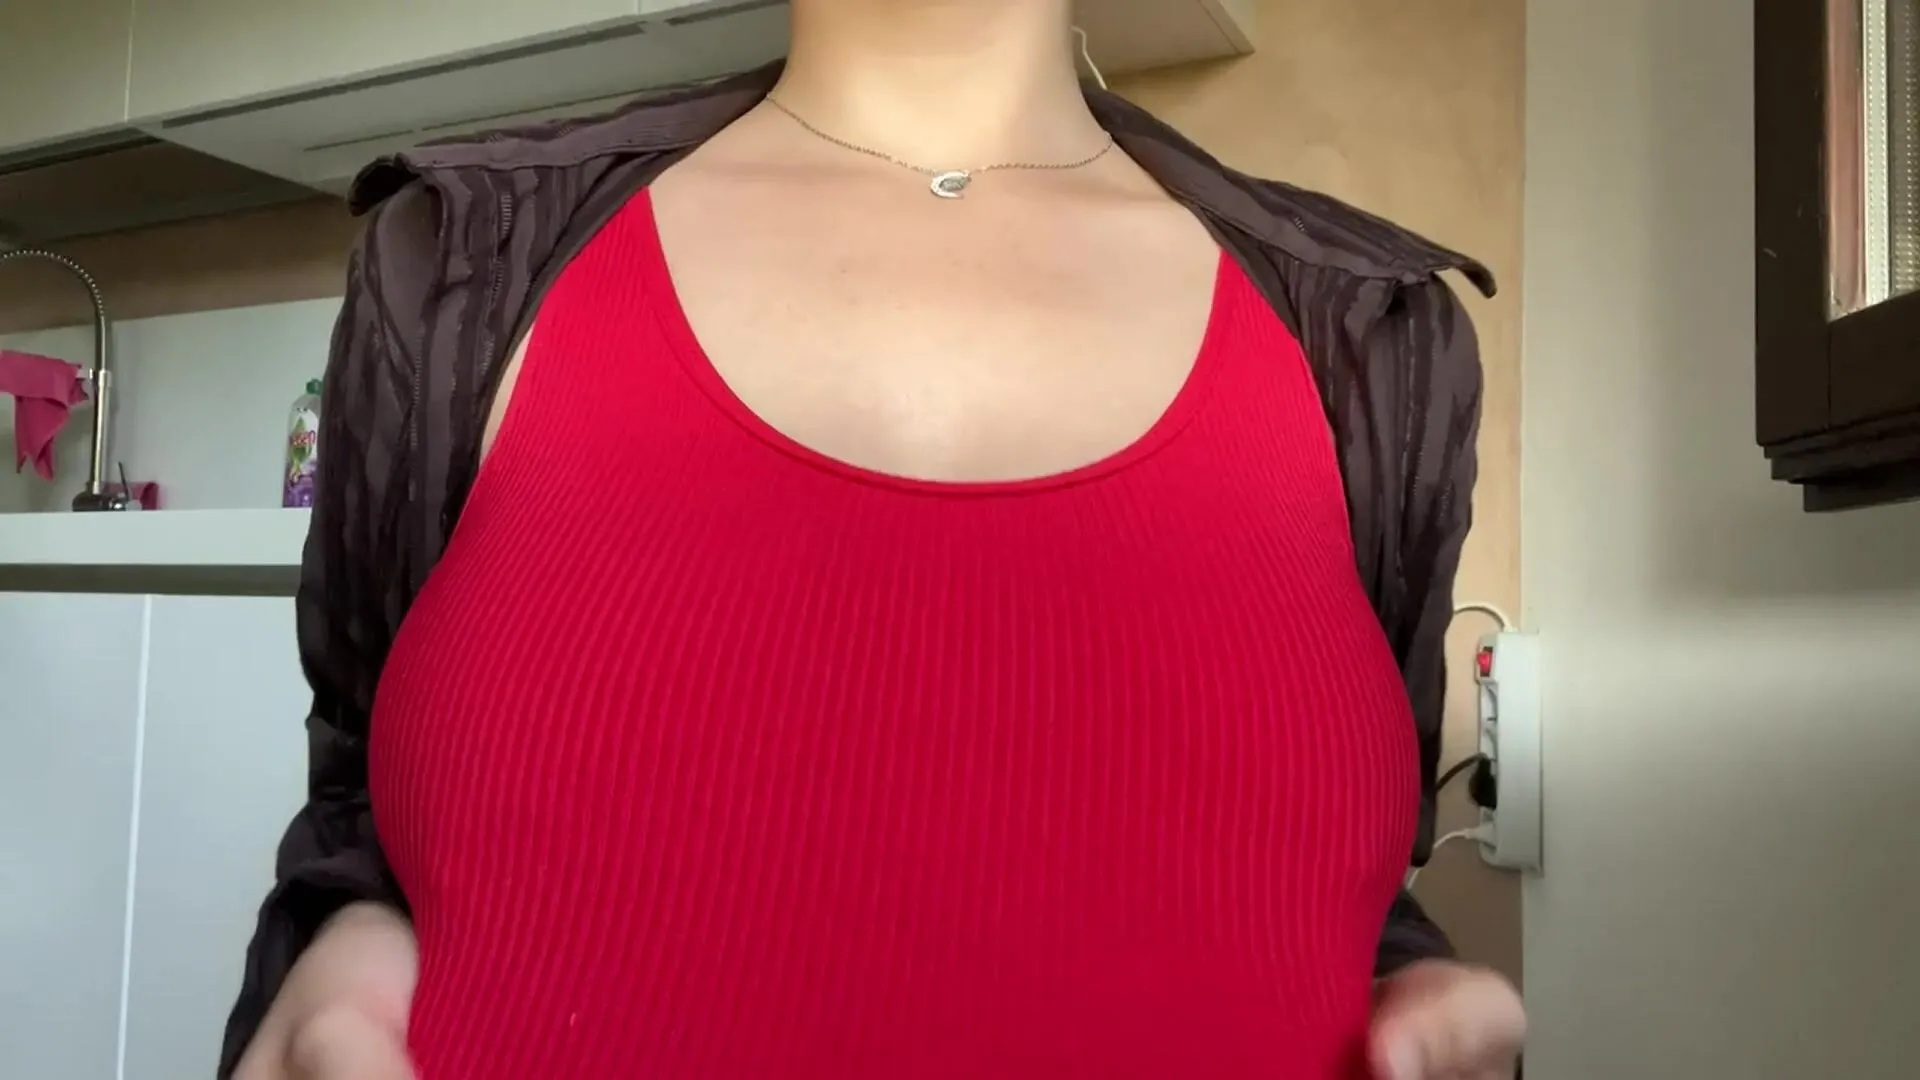 Big 18 years old tits are always a surprise